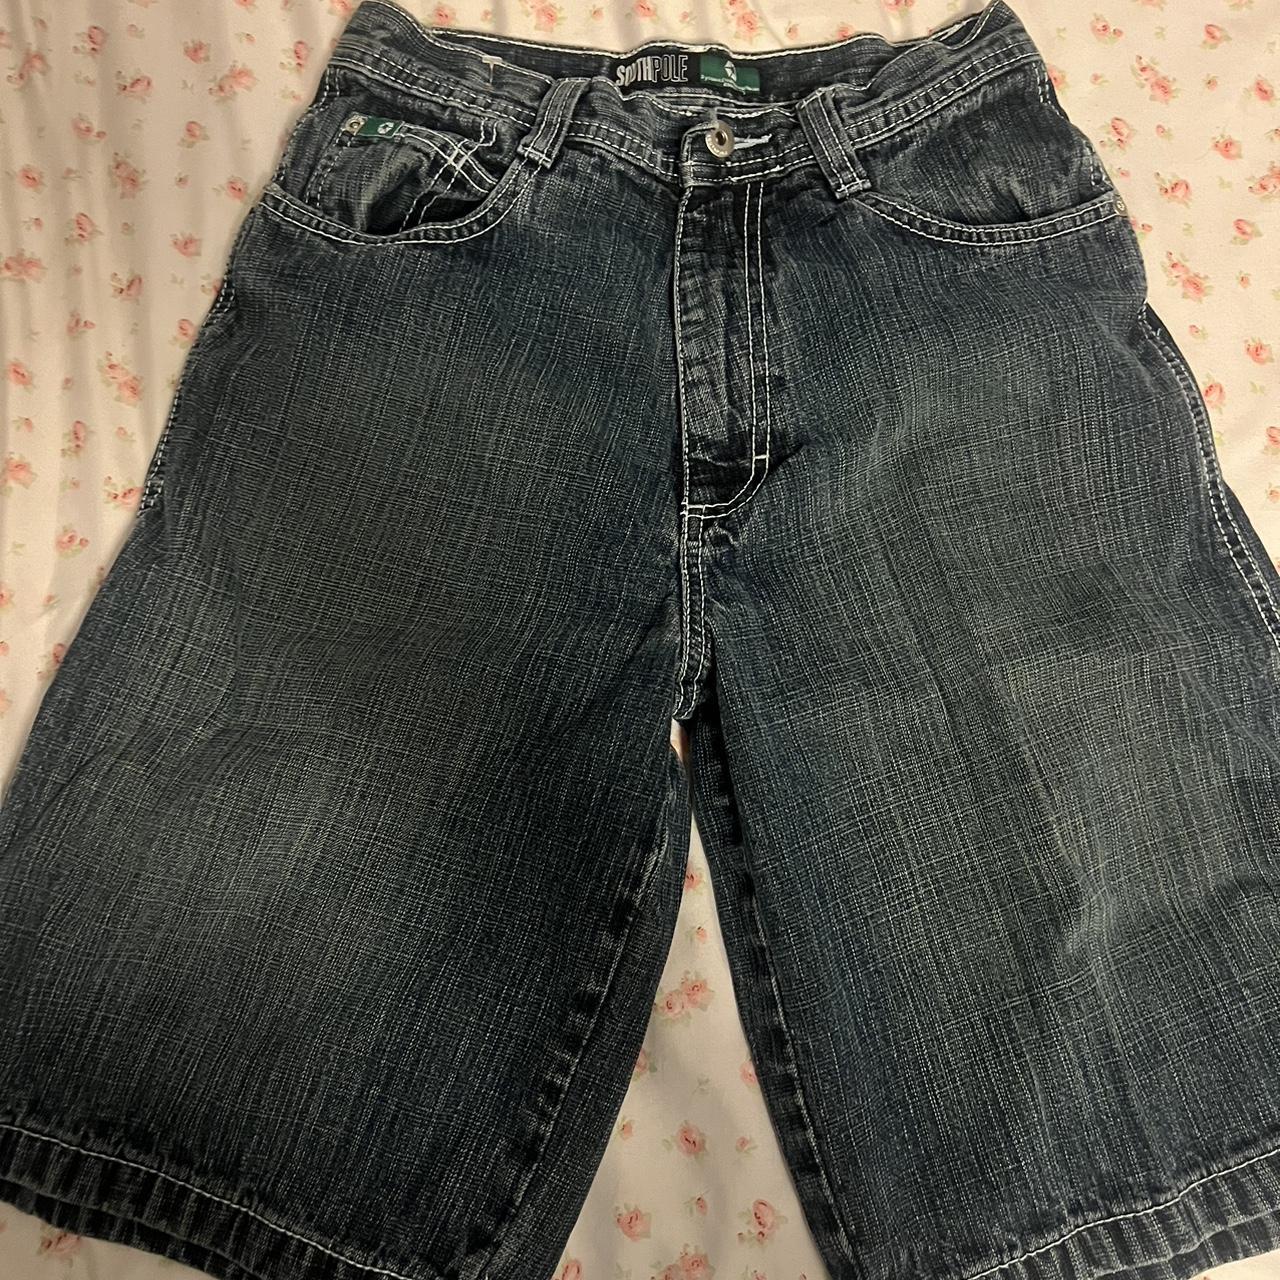 South Pole jorts (no flaws or stains) size 16 in... - Depop